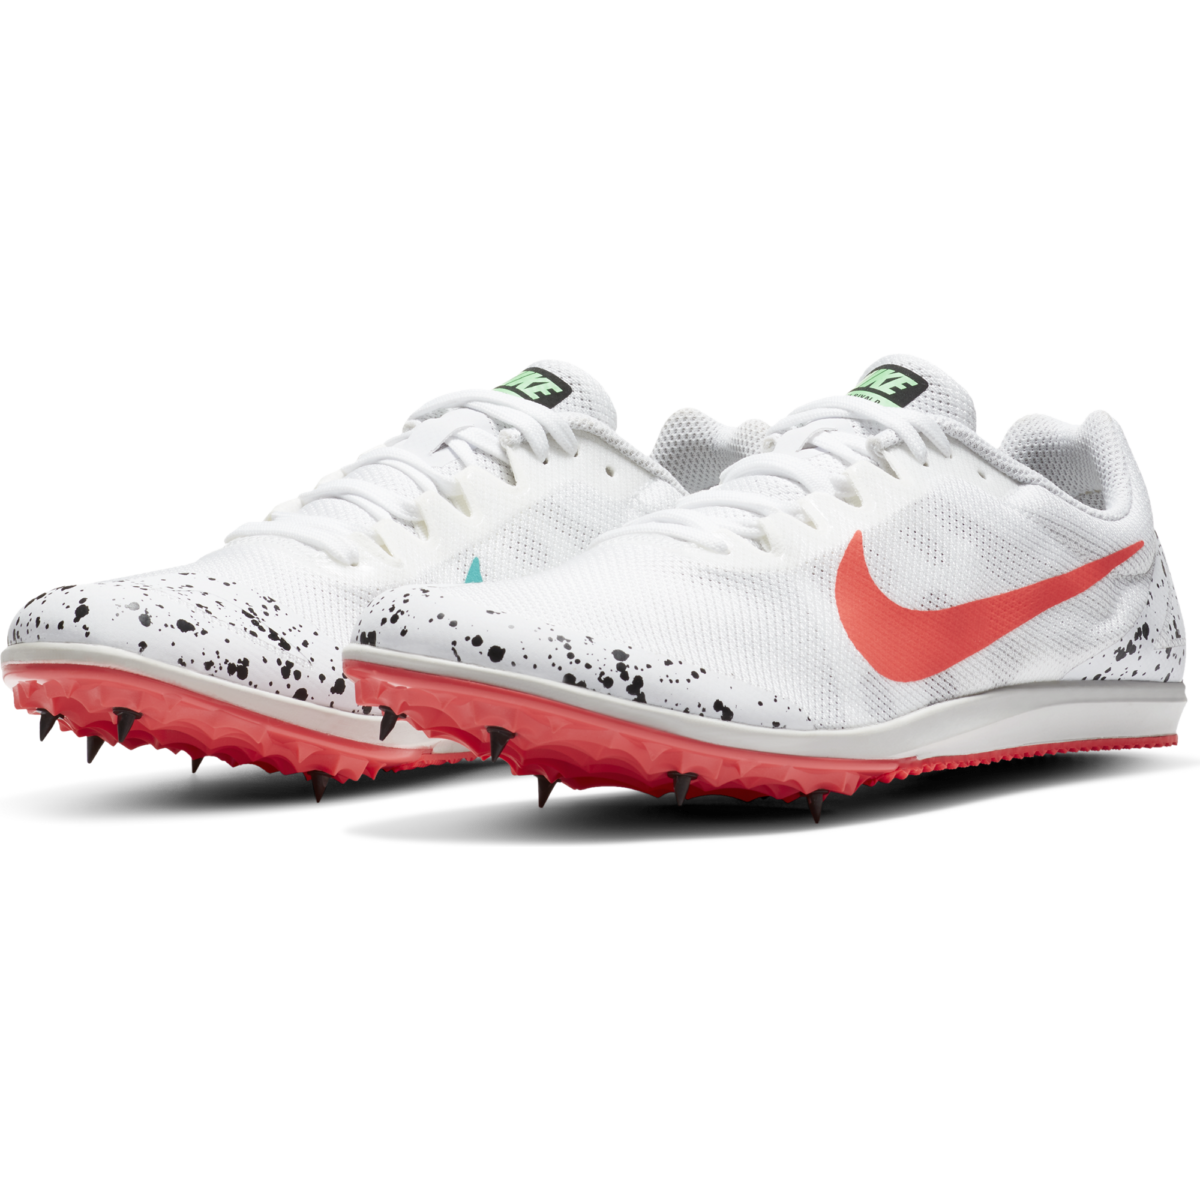 Unisex Nike Zoom Rival D 10 Distance Spikes 907566-100